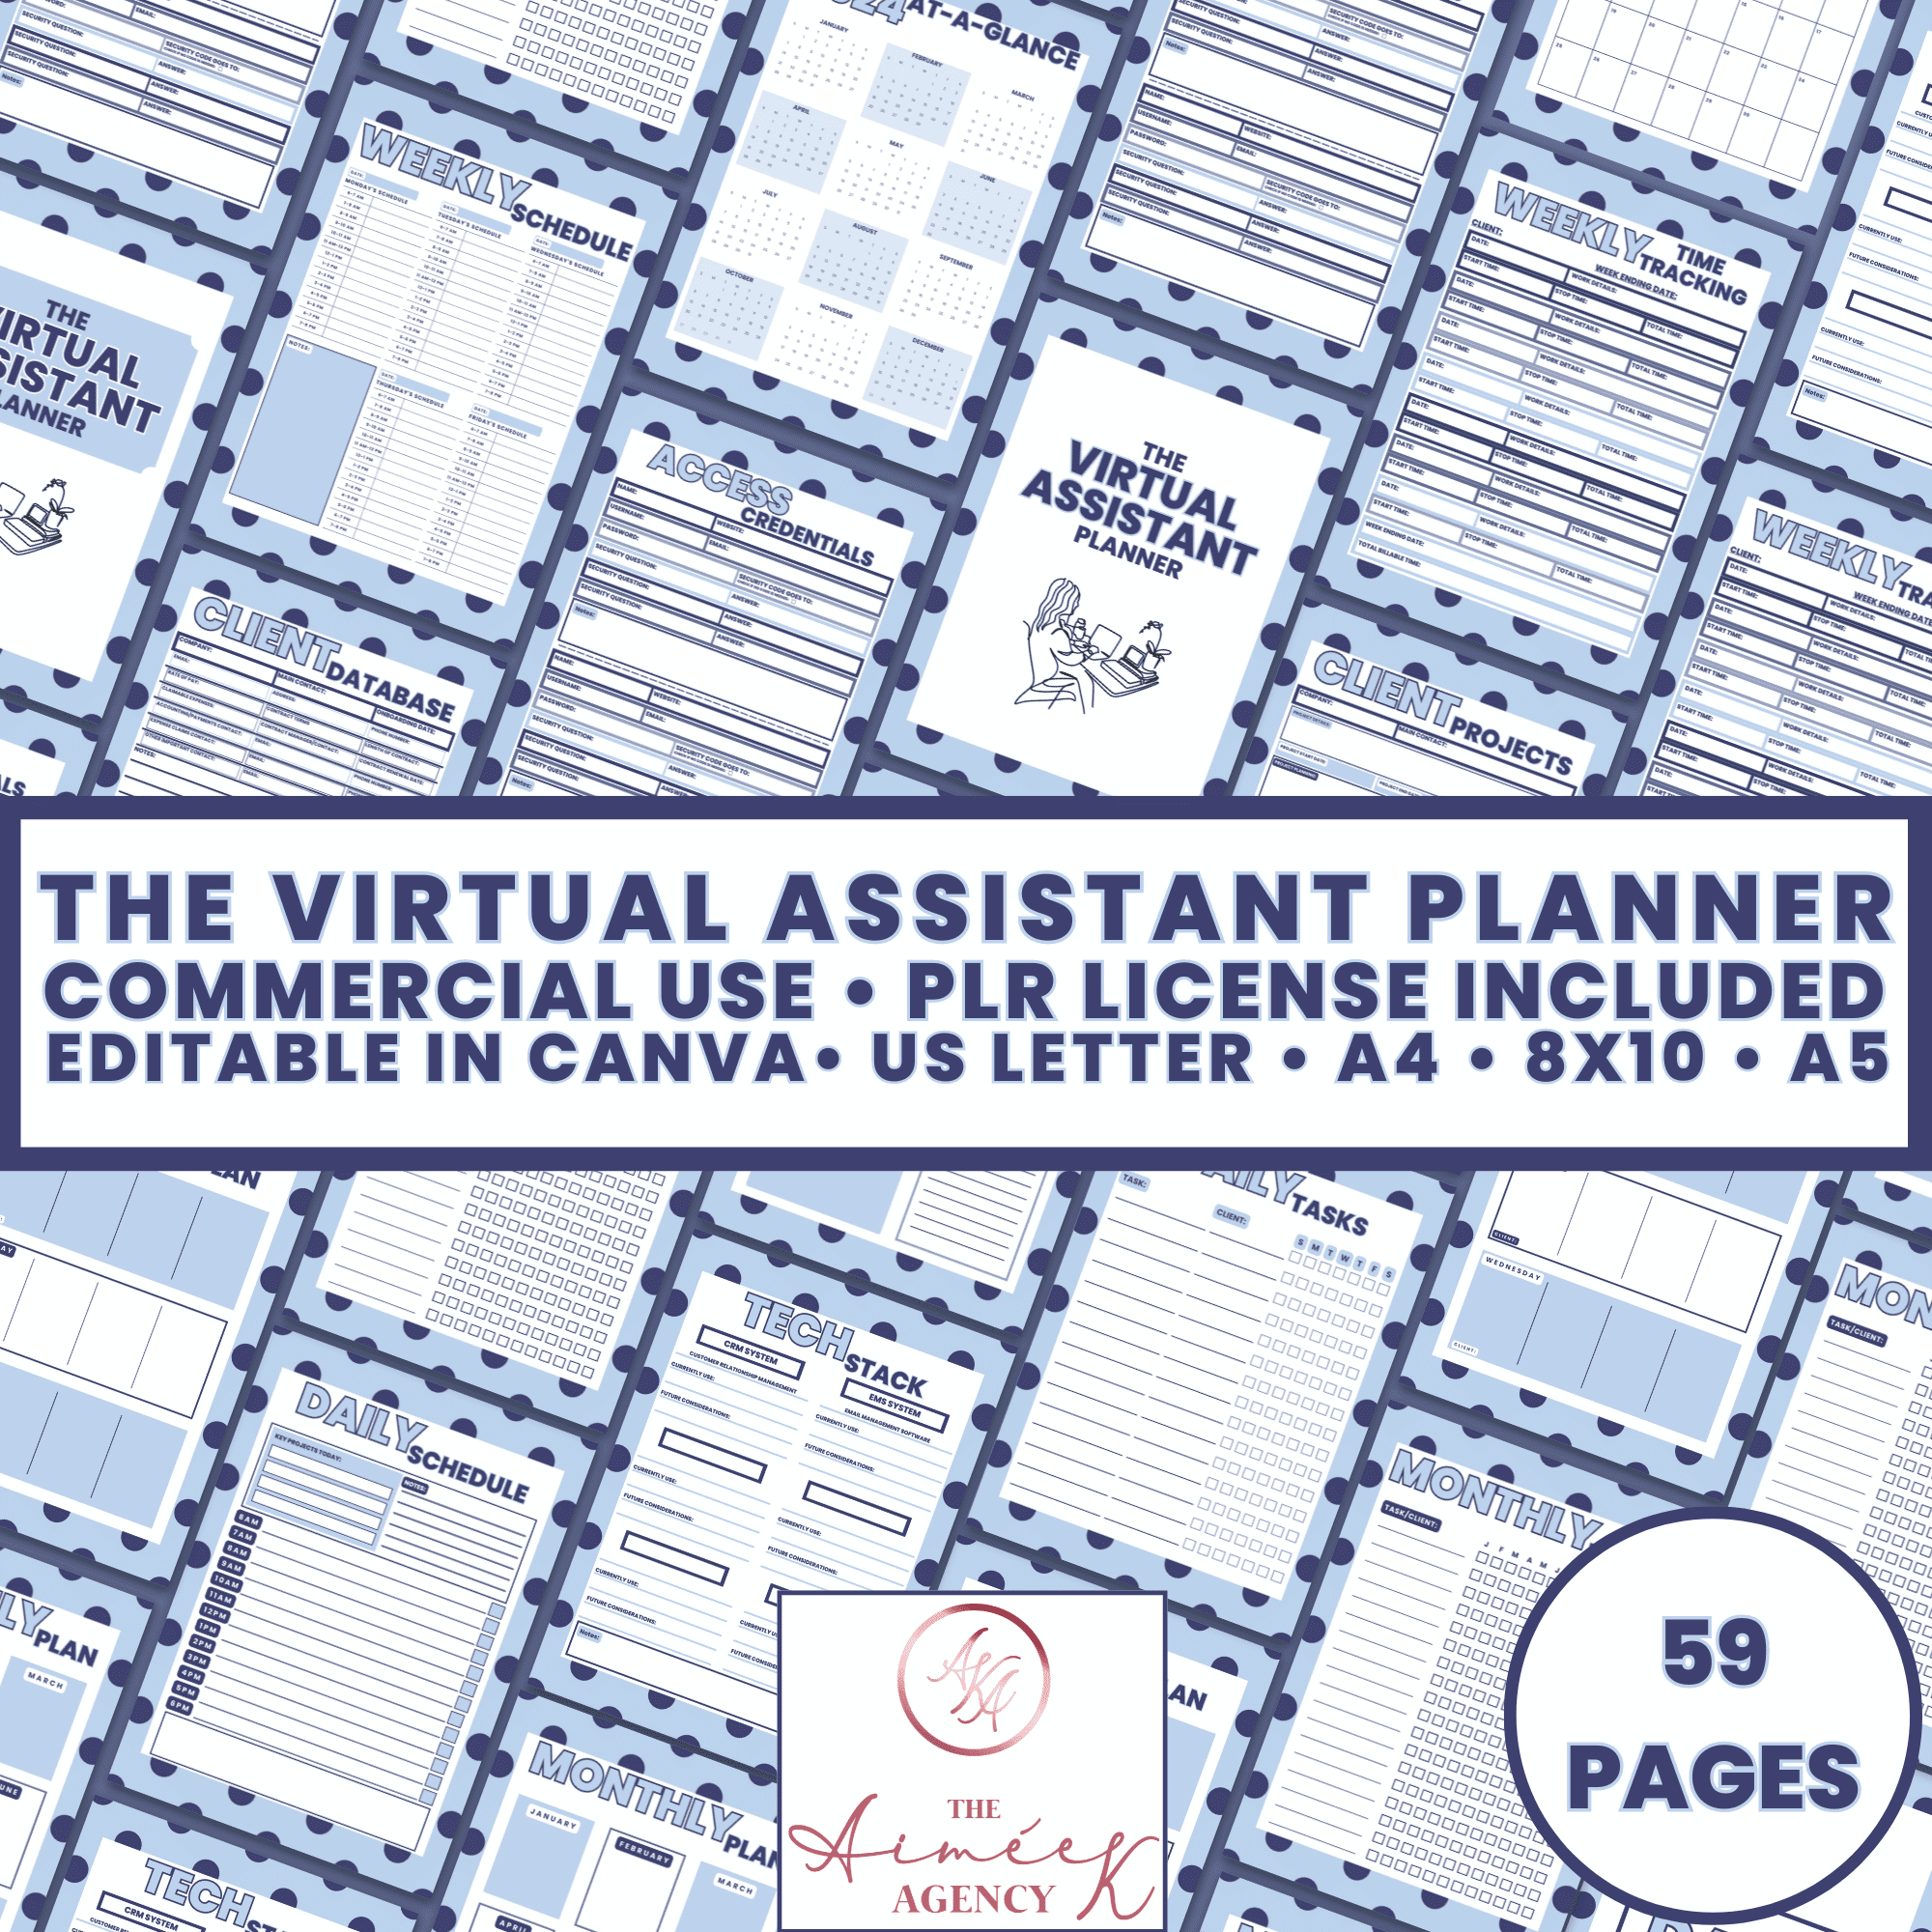 A collection of virtual assistant planner pages with text describing commercial use, PLR license included, editable in Canva, available in US Letter, A4, and 8x10 sizes, totaling 59 pages.